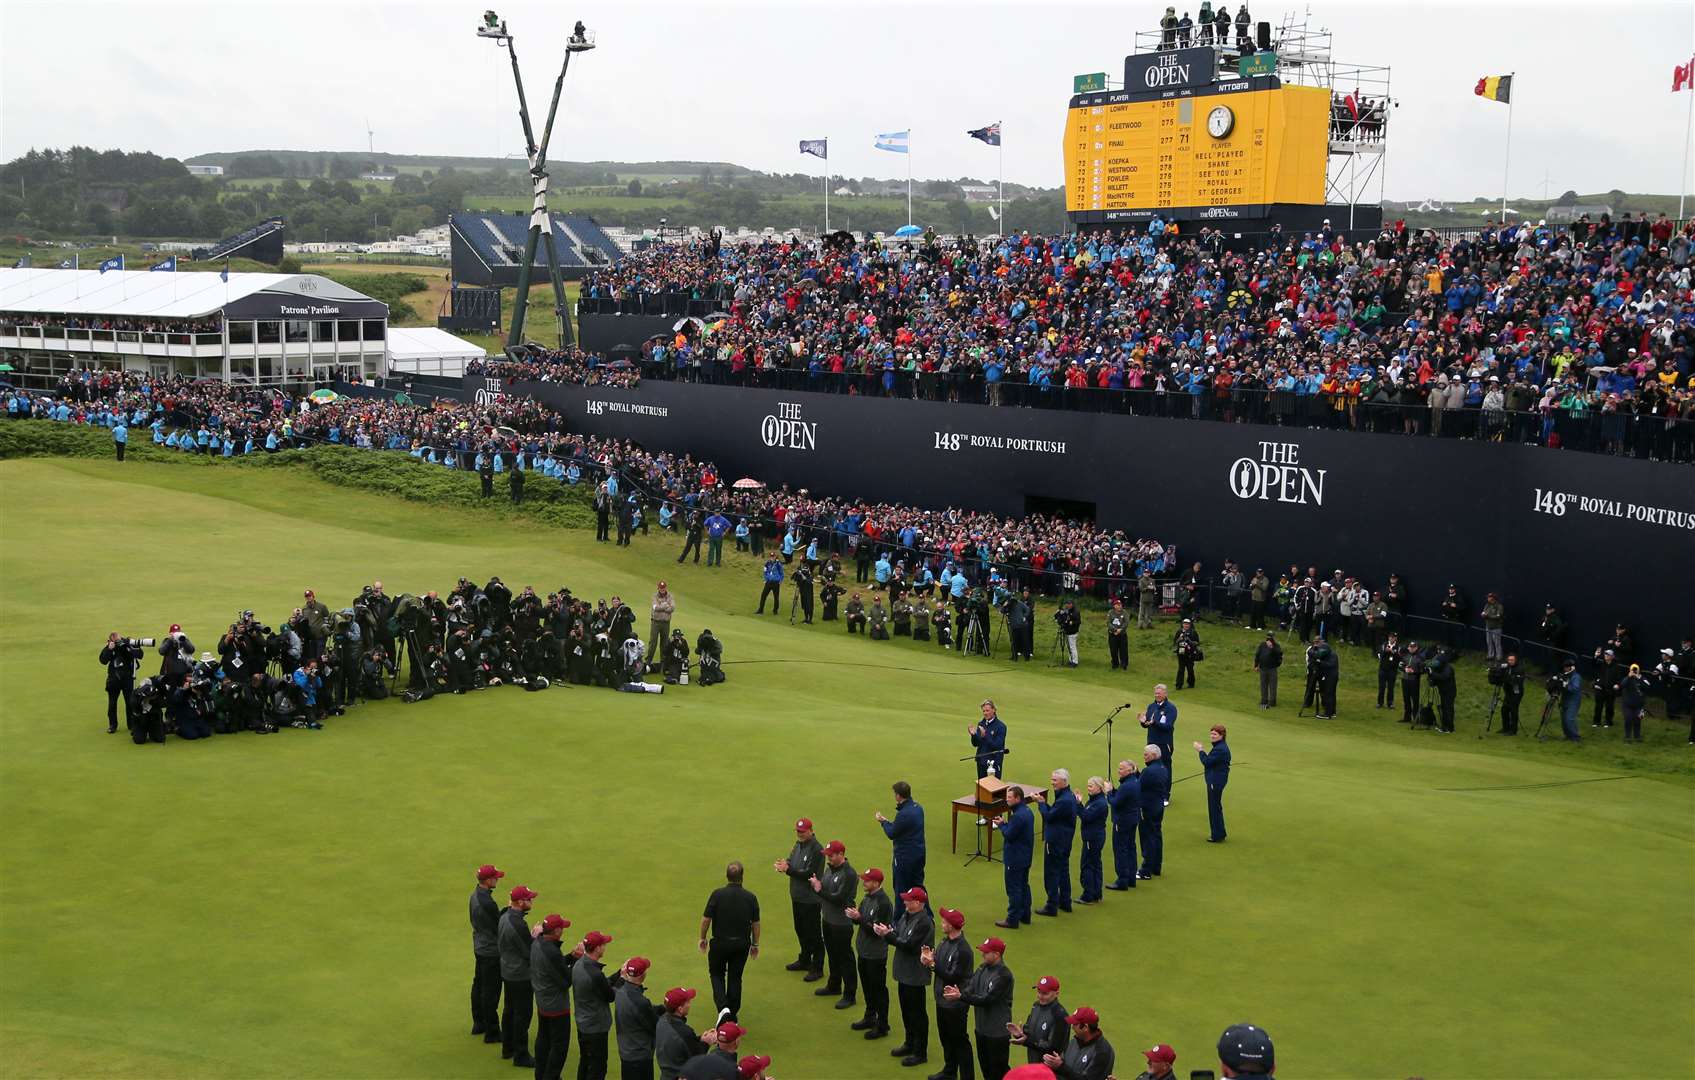 Mr Sterling cites the hosting of the Open Championship at Royal Portrush as one of his most memorable moments as head of the Civil Service (PA)